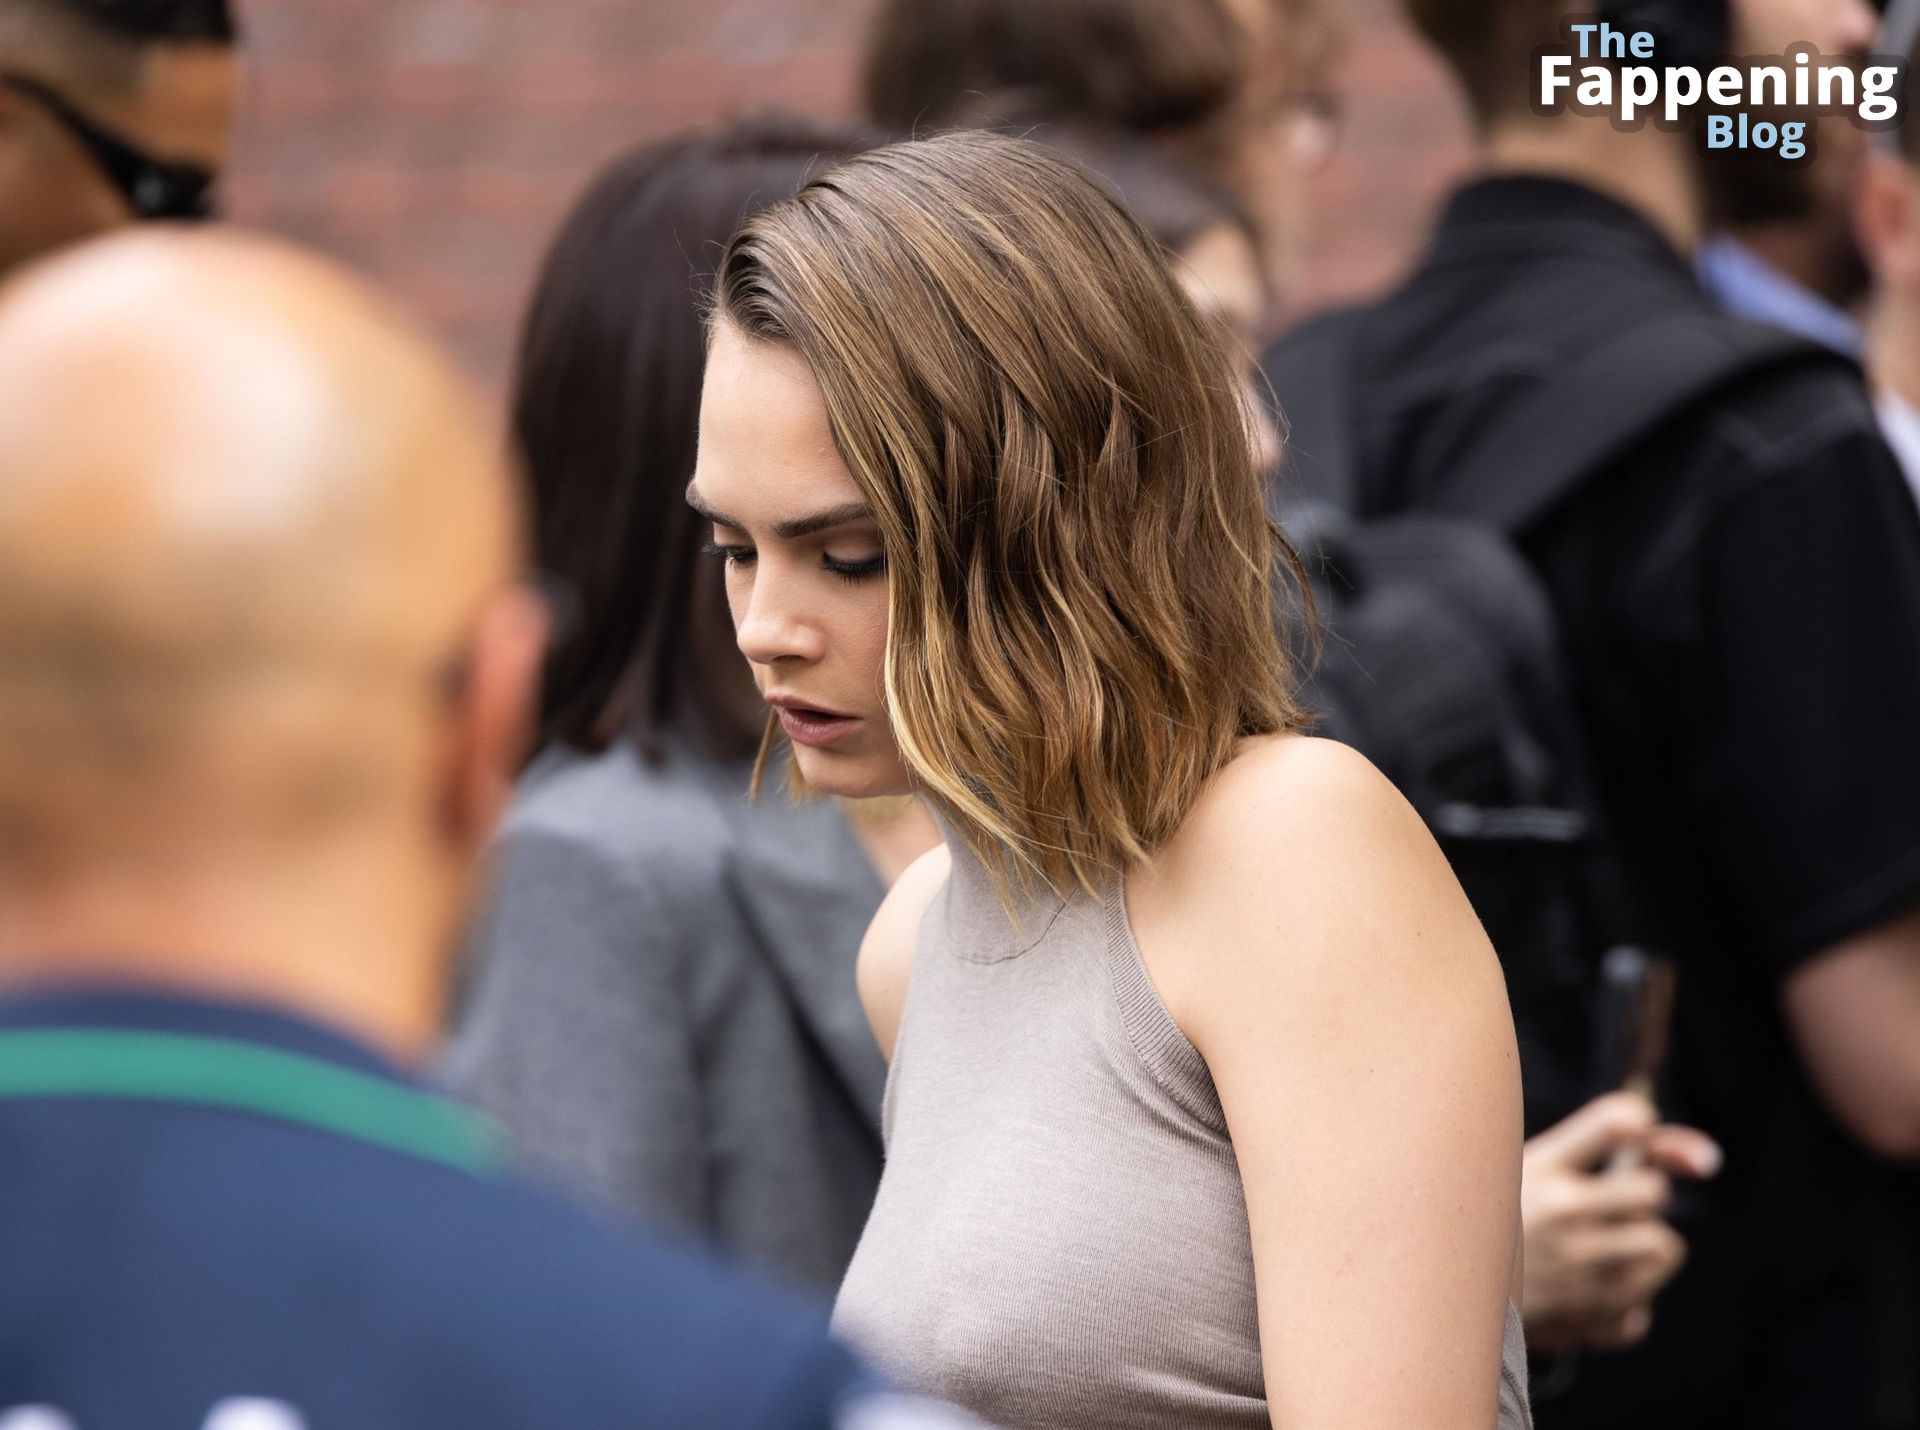 Cara-Delevingne-Sexy-38-The-Fappening-Blog.jpg